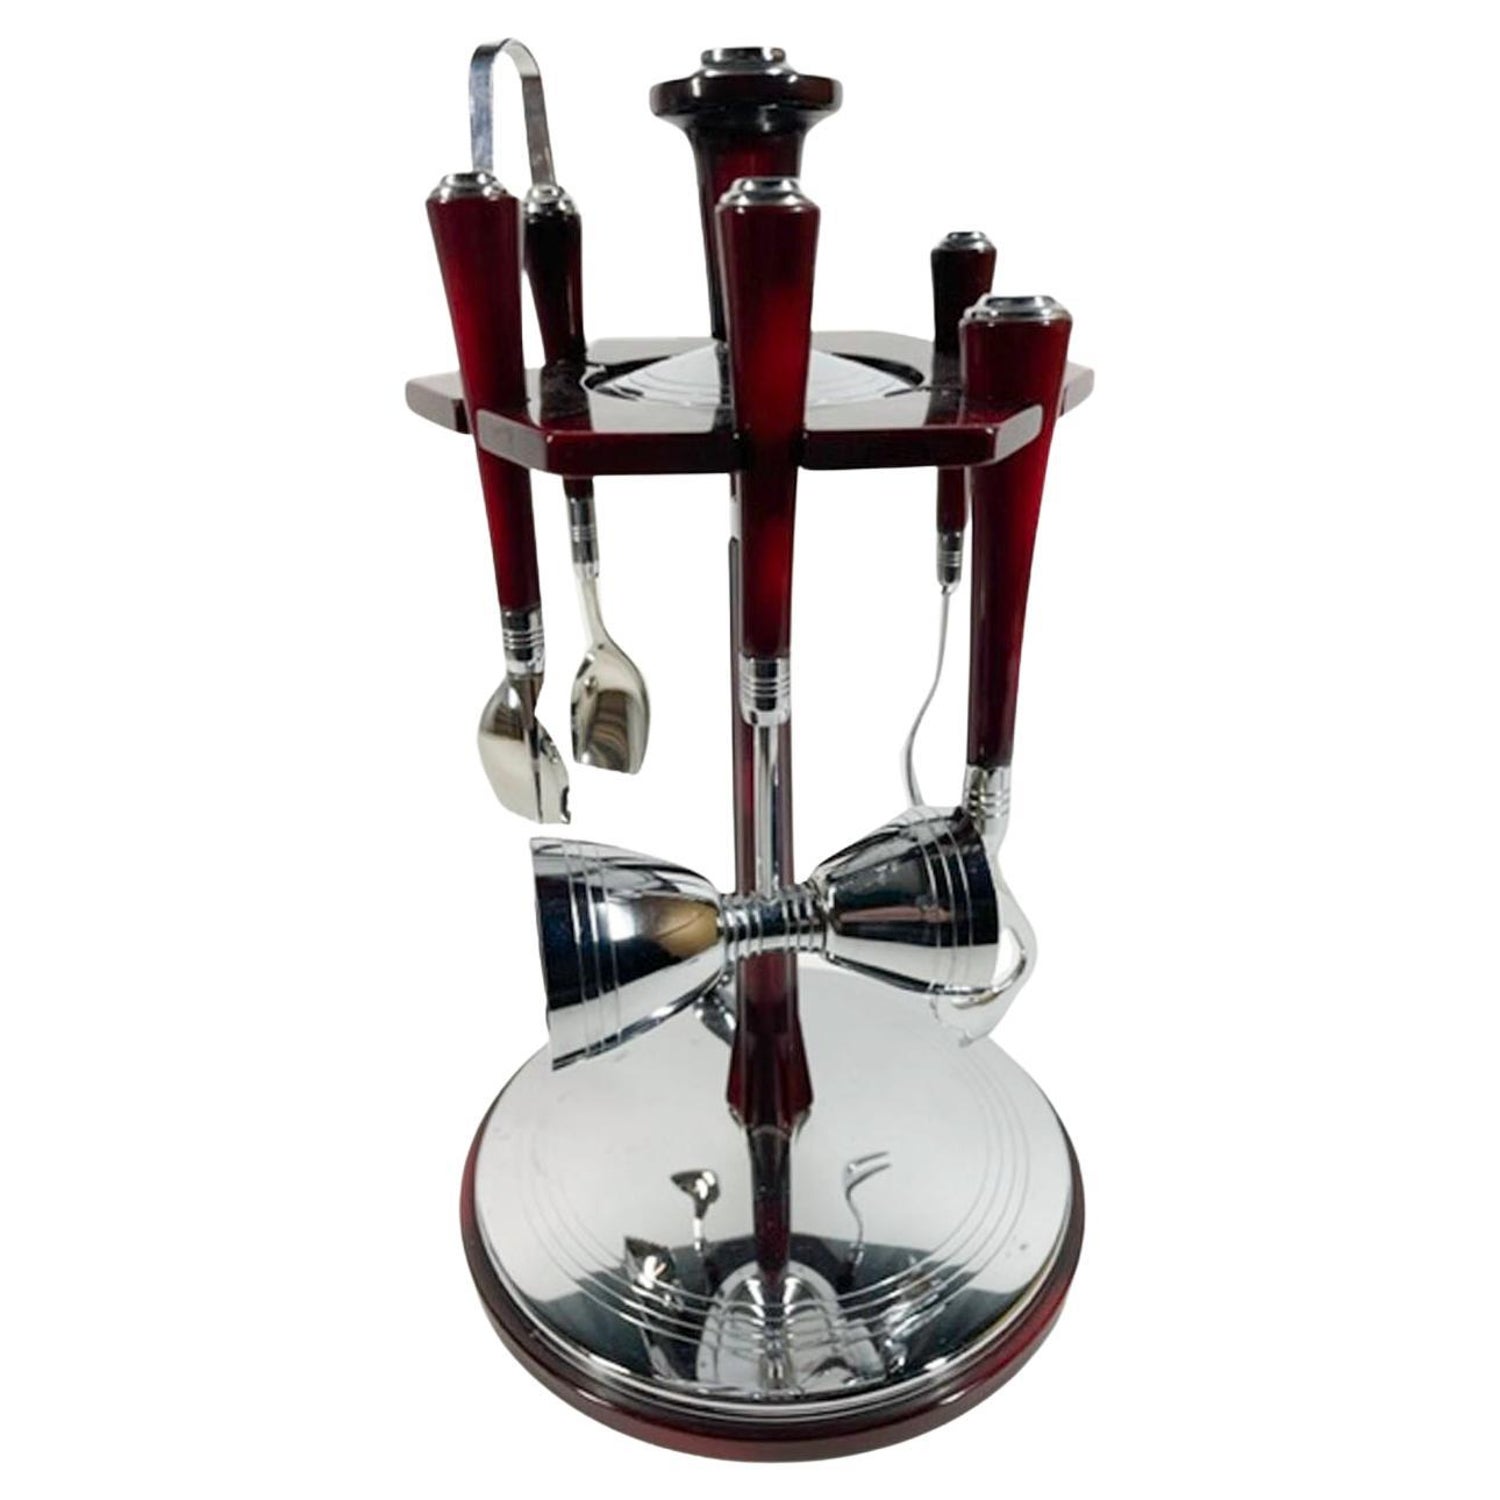 https://a.1stdibscdn.com/glo-hill-6-piece-bar-tool-set-with-revolving-stand-in-red-bakelite-and-chrome-for-sale/f_13752/f_310754721667146135693/f_31075472_1667146135989_bg_processed.jpg?width=1500